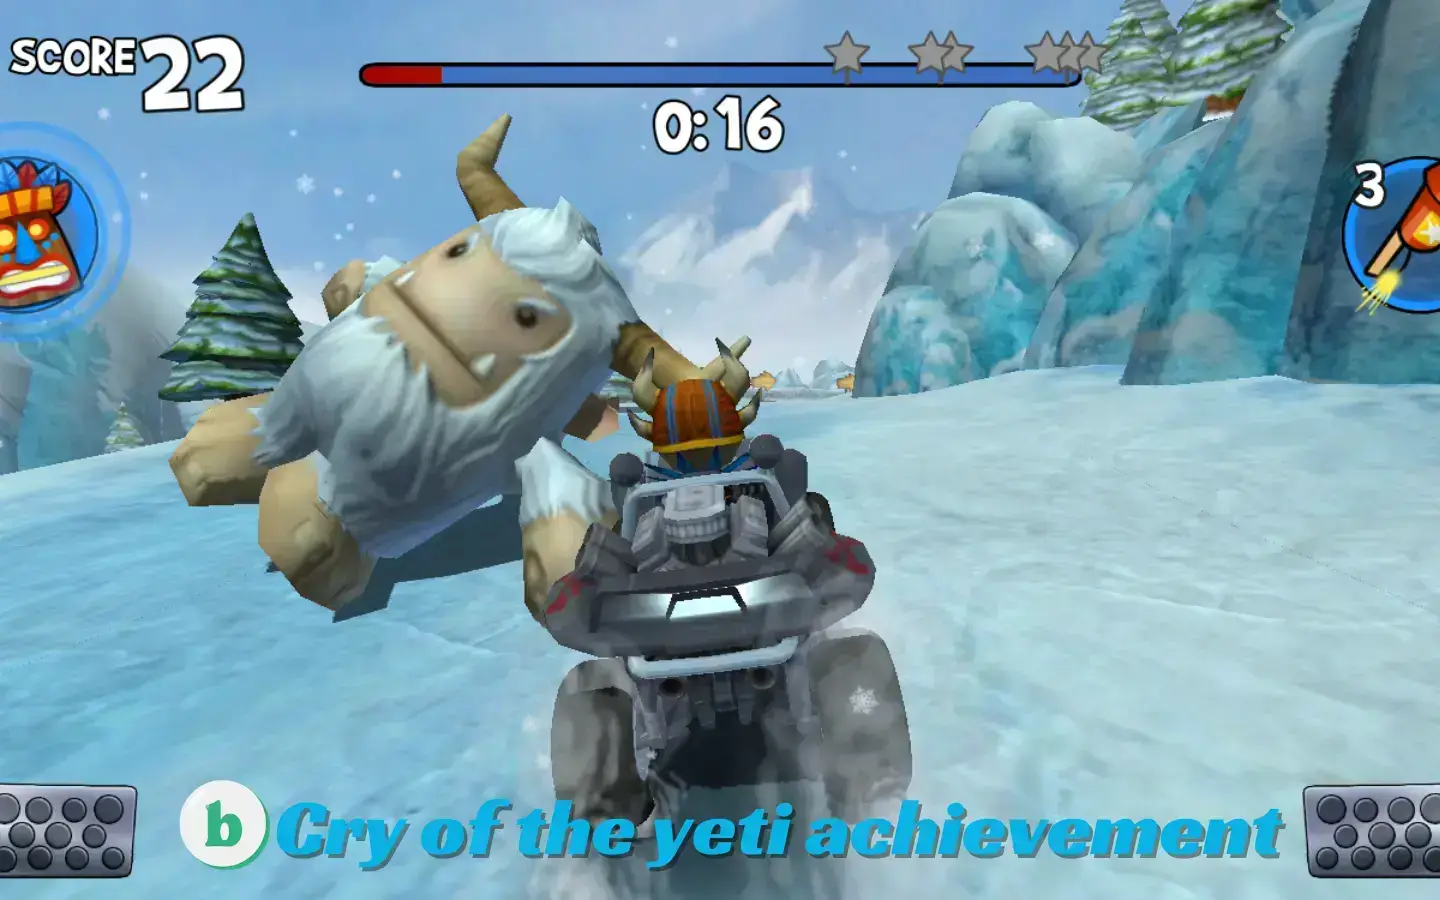 How-to-unlock-cry-of-yeti-achievement-in-Beach-buggy